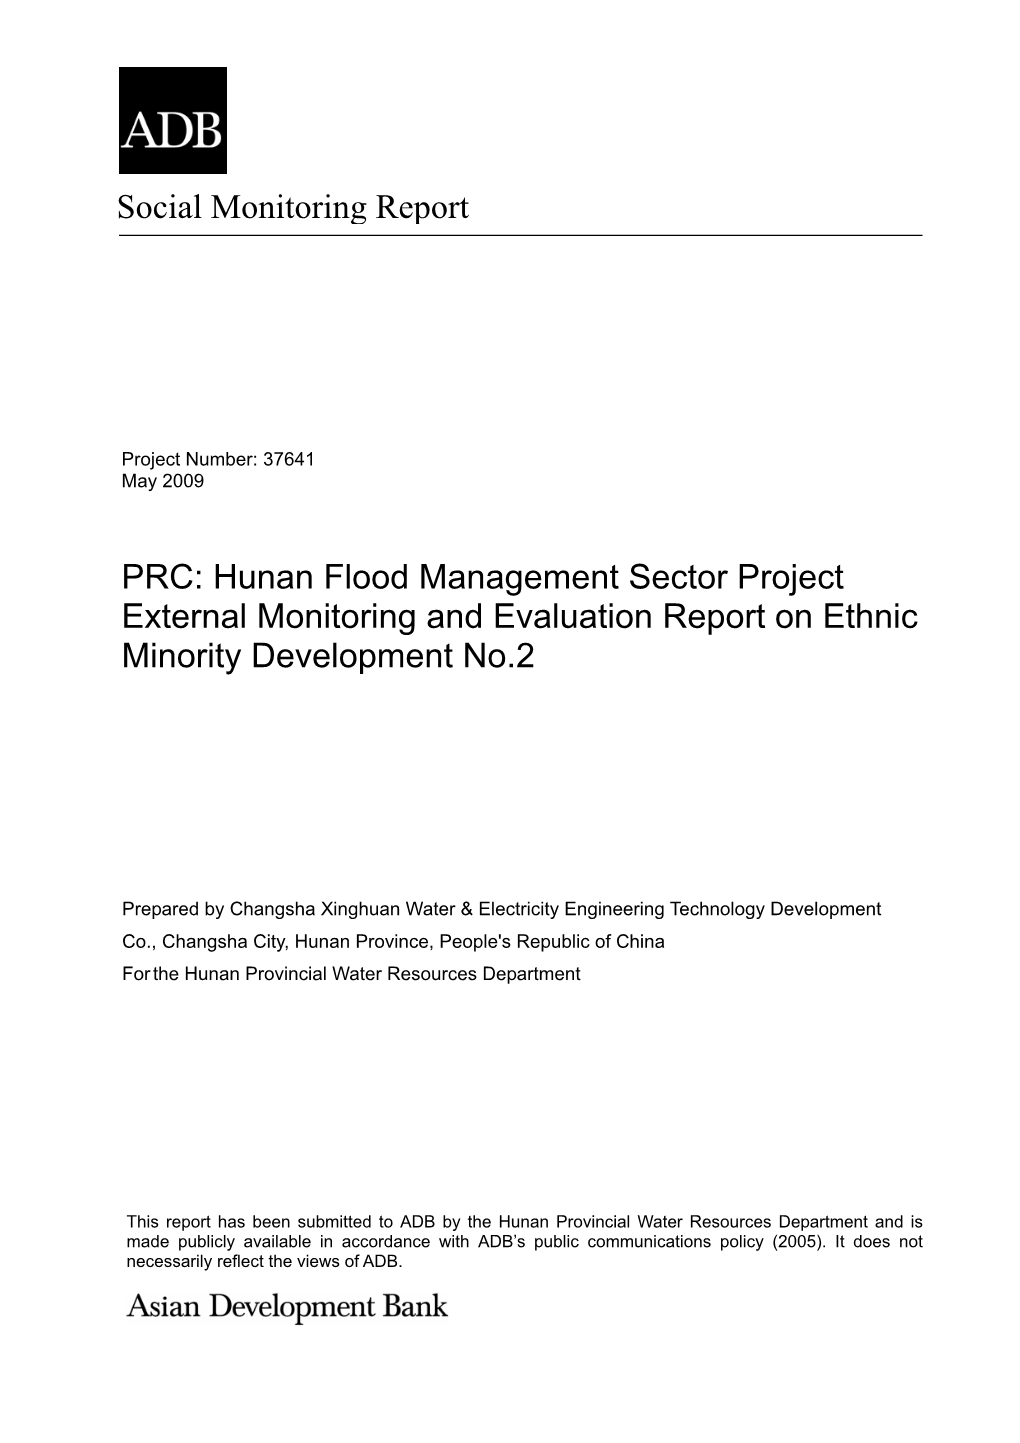 Hunan Flood Management Sector Project External Monitoring and Evaluation Report on Ethnic Minority Development No.2